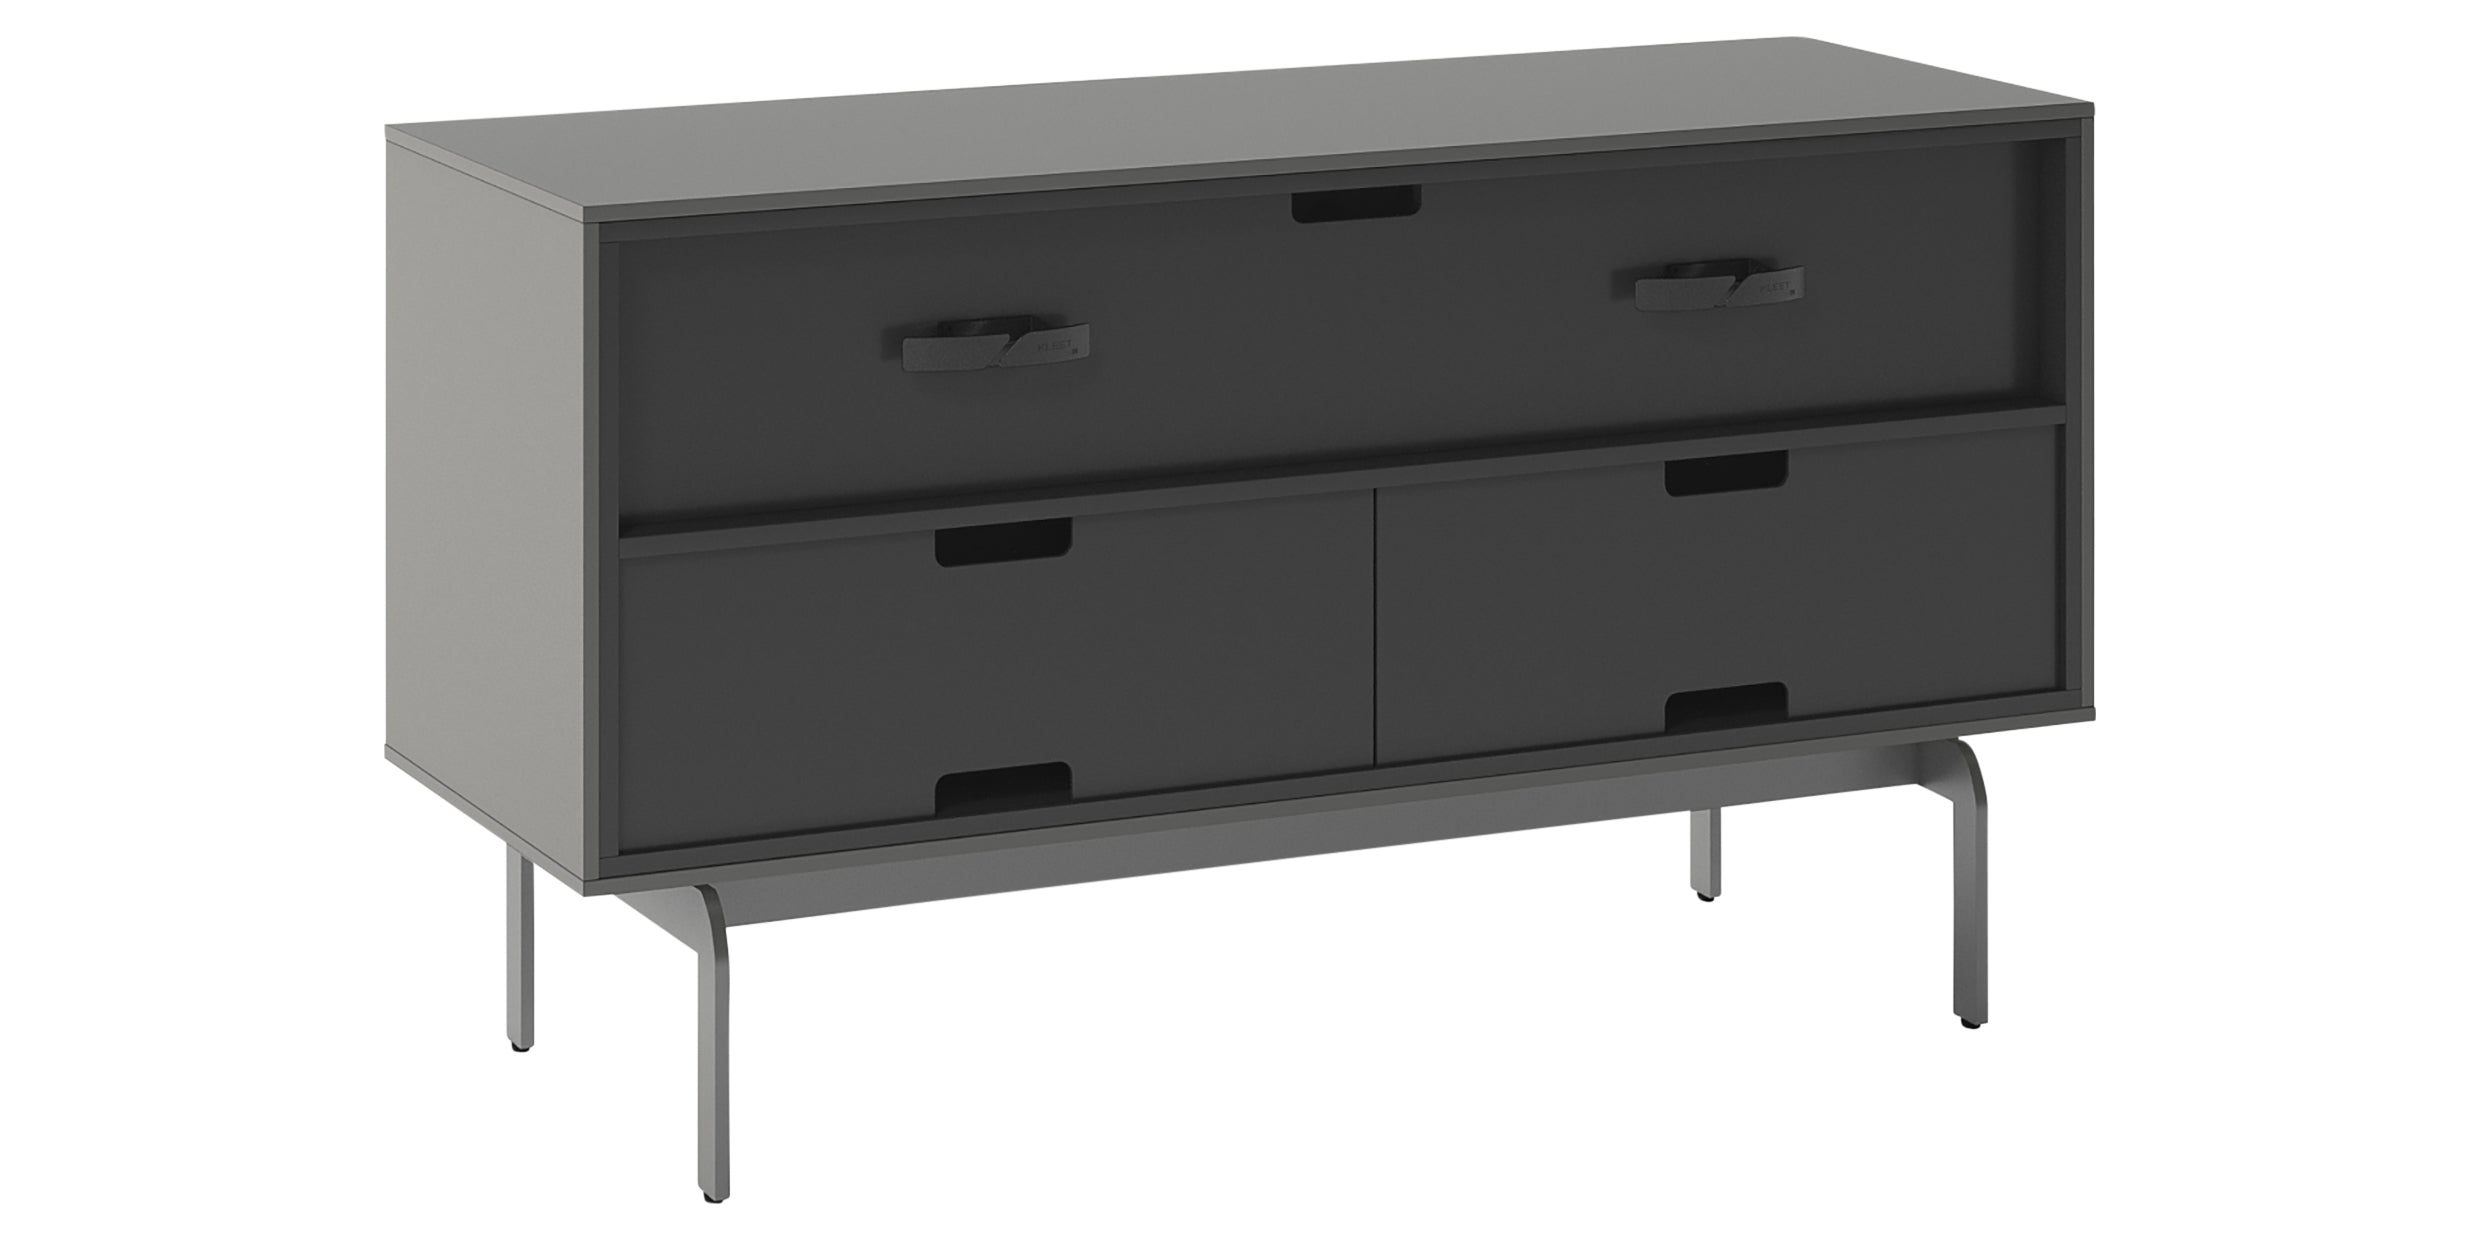 Fog Grey with Console Base | BDI Align 2 Door TV Stand | Valley Ridge Furniture